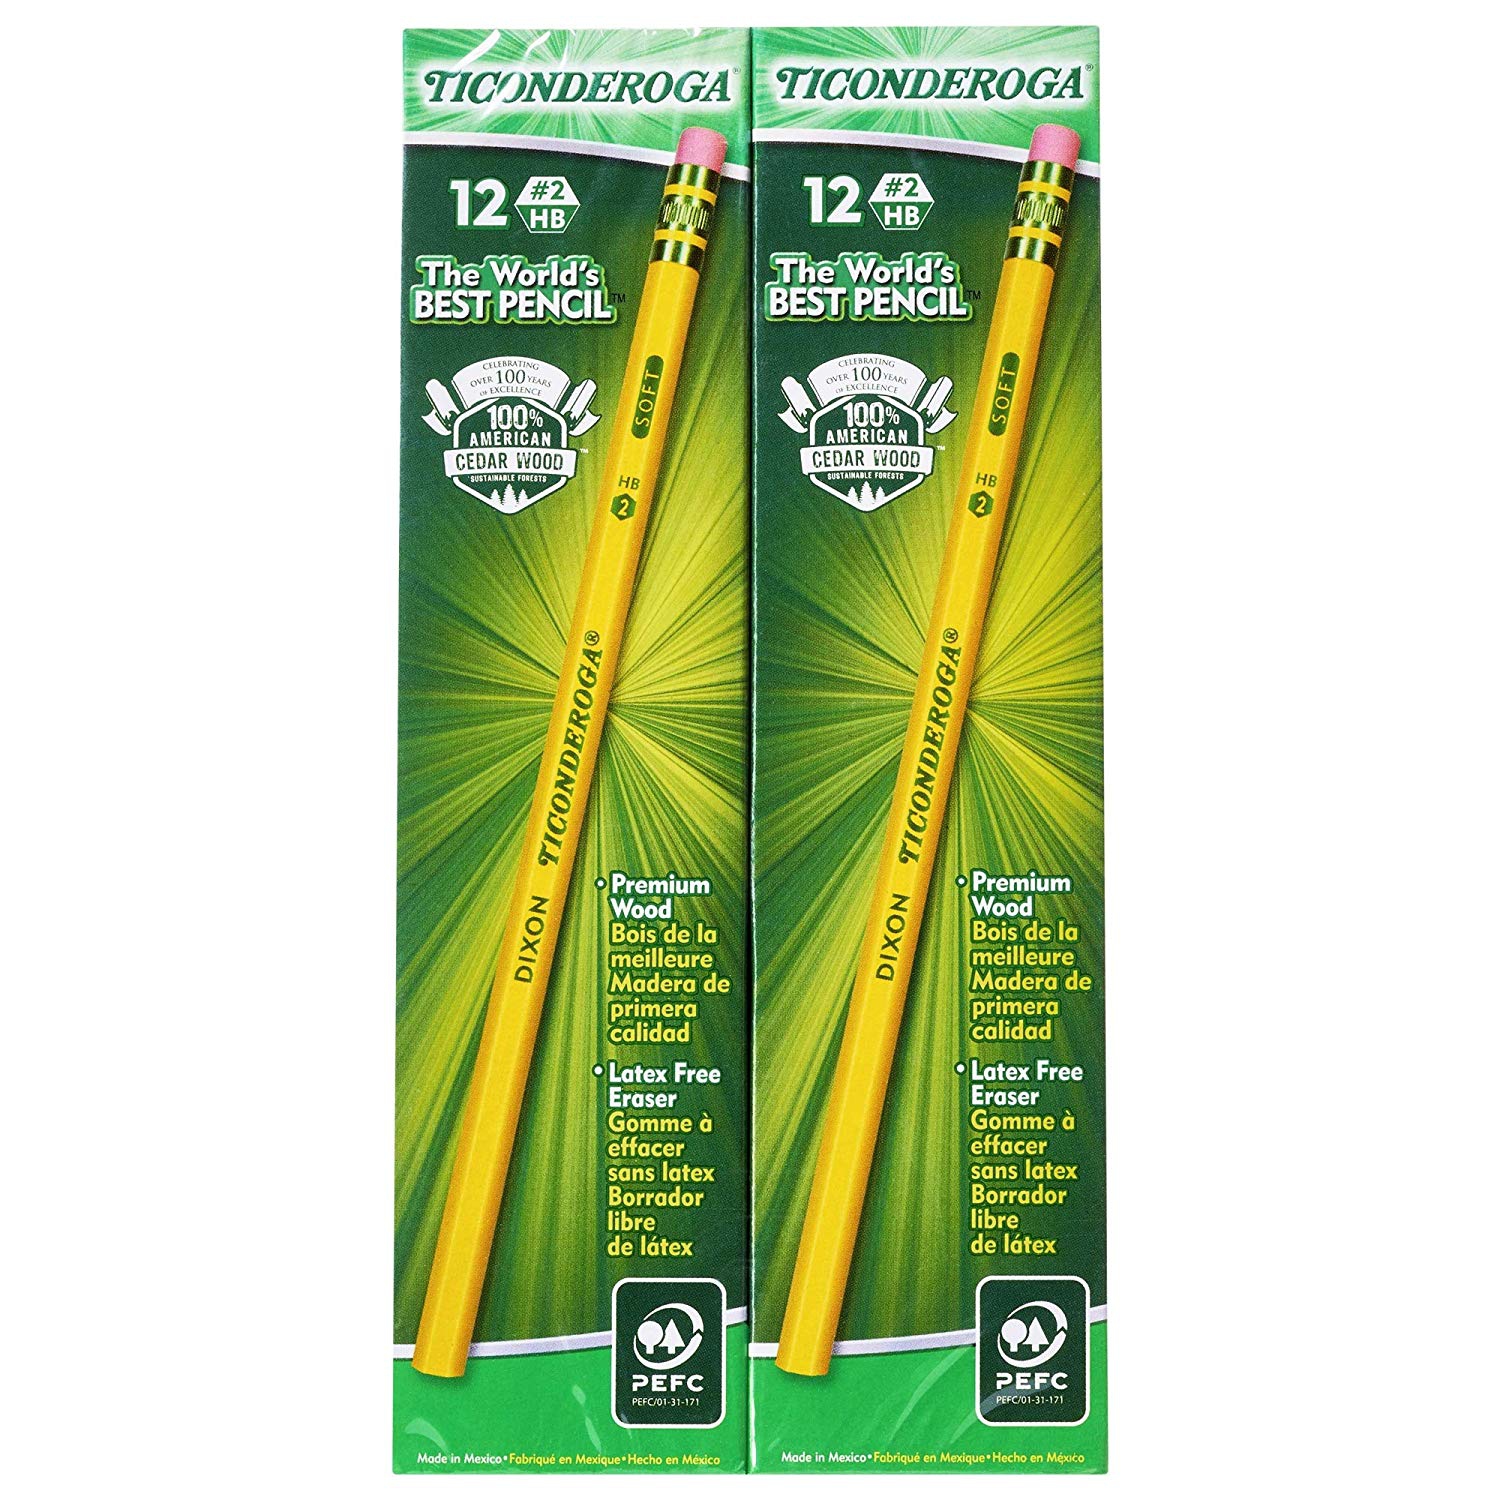 TICONDEROGA Pencils Graphite #2 HB Soft 14634 240-Pack New Yellow Pre-Sharpened Wood-Cased